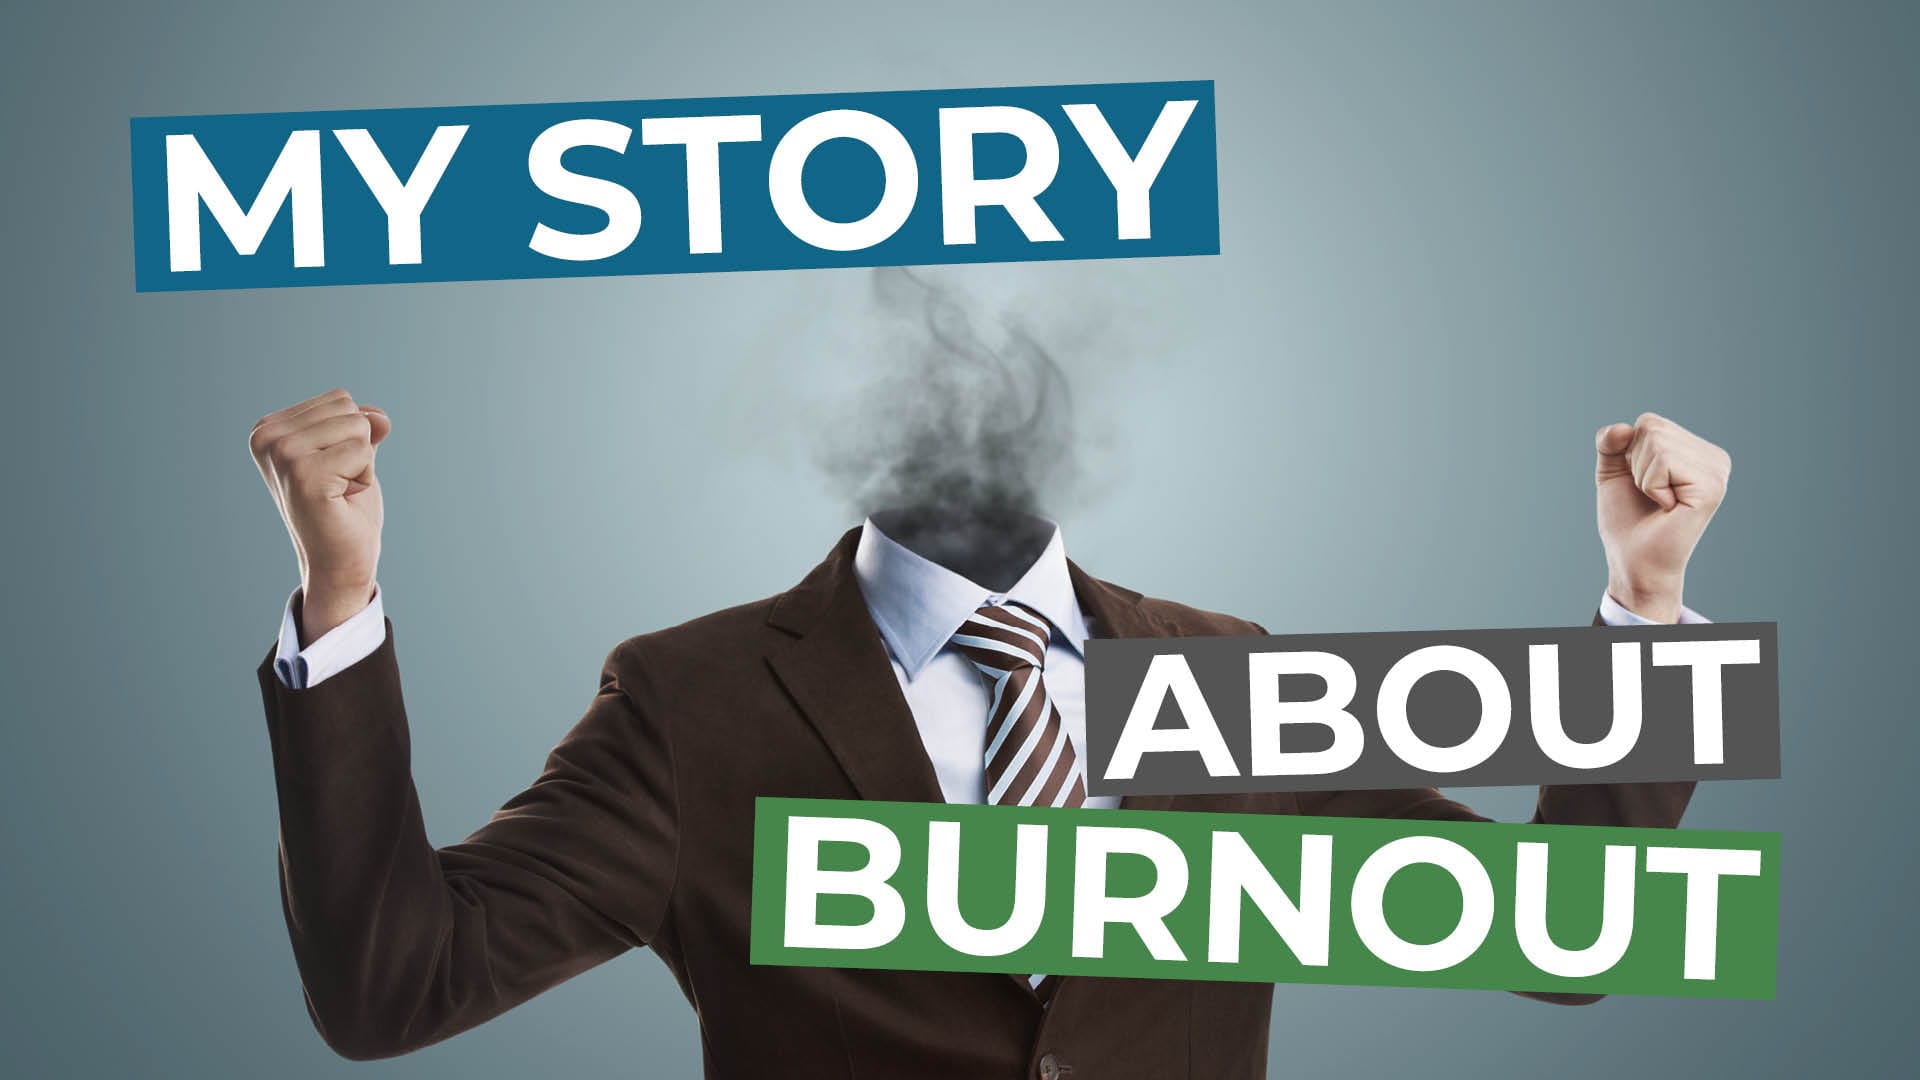 016 – How Burnout Landed My In The Hospital – Twice